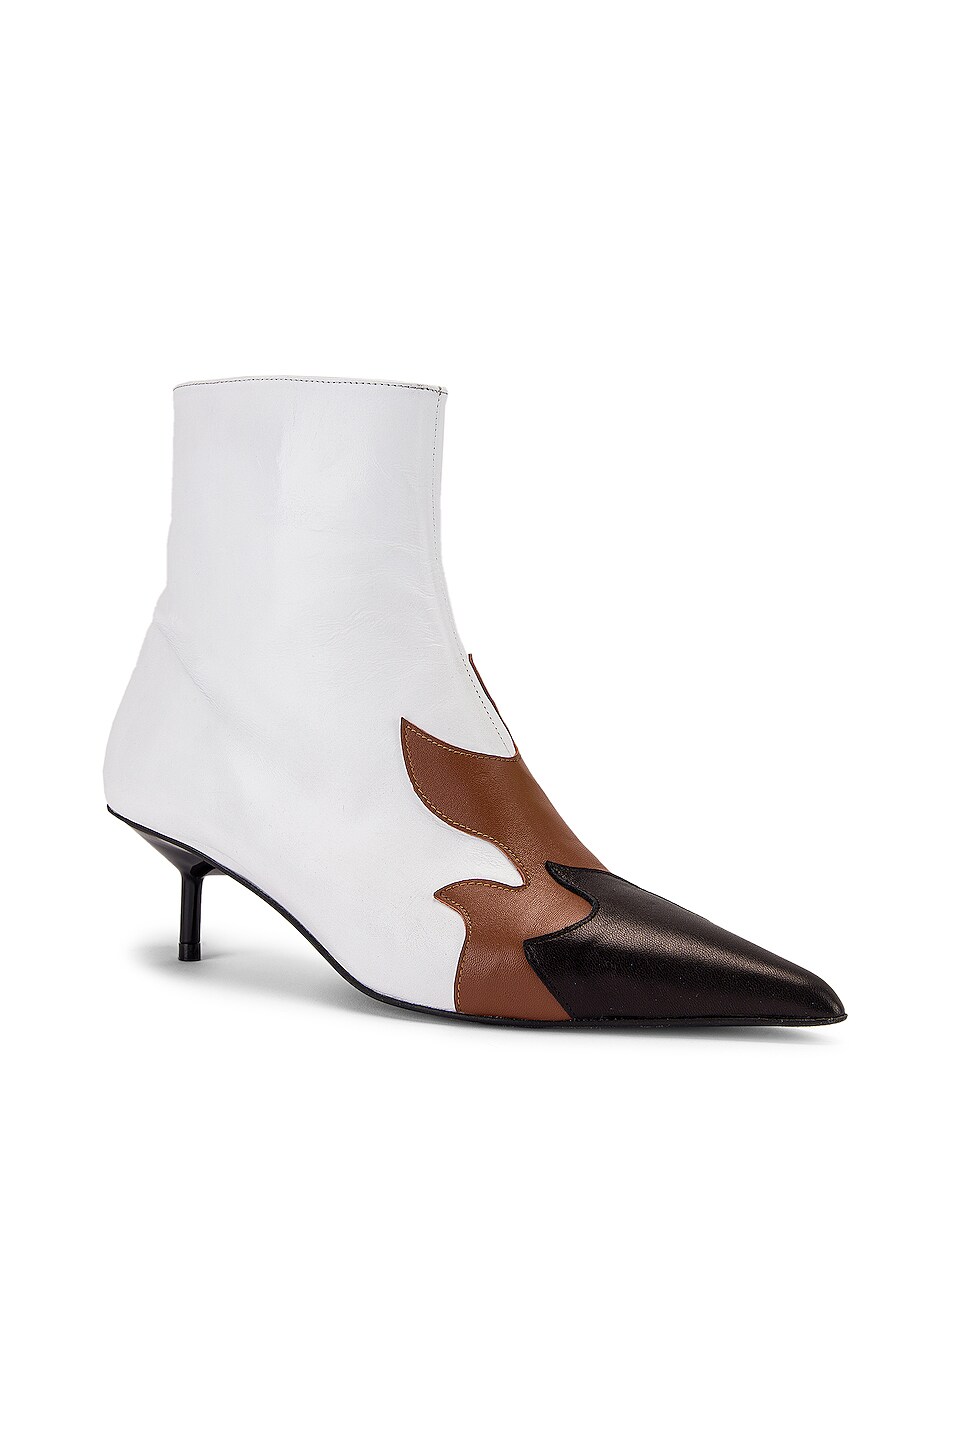 Marques ' Almeida Pointy Kitten Heel Flame Boot in White, Brown & Black ...